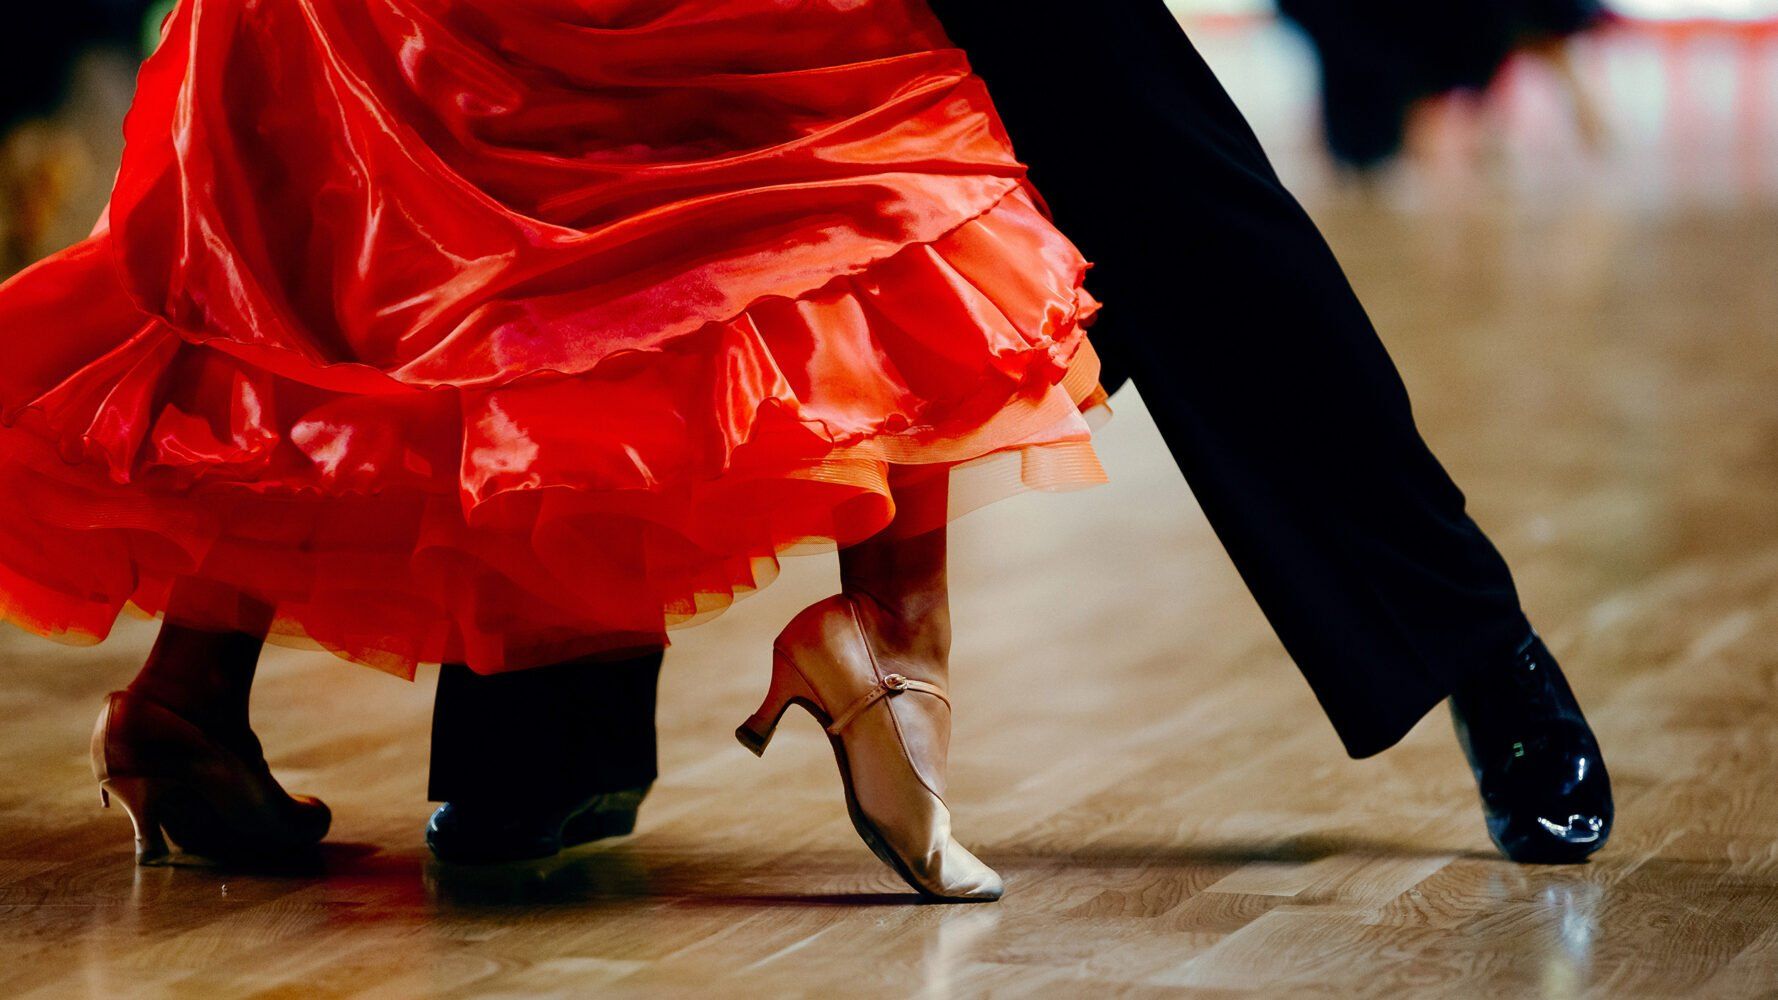 classical music to dance to: a tango